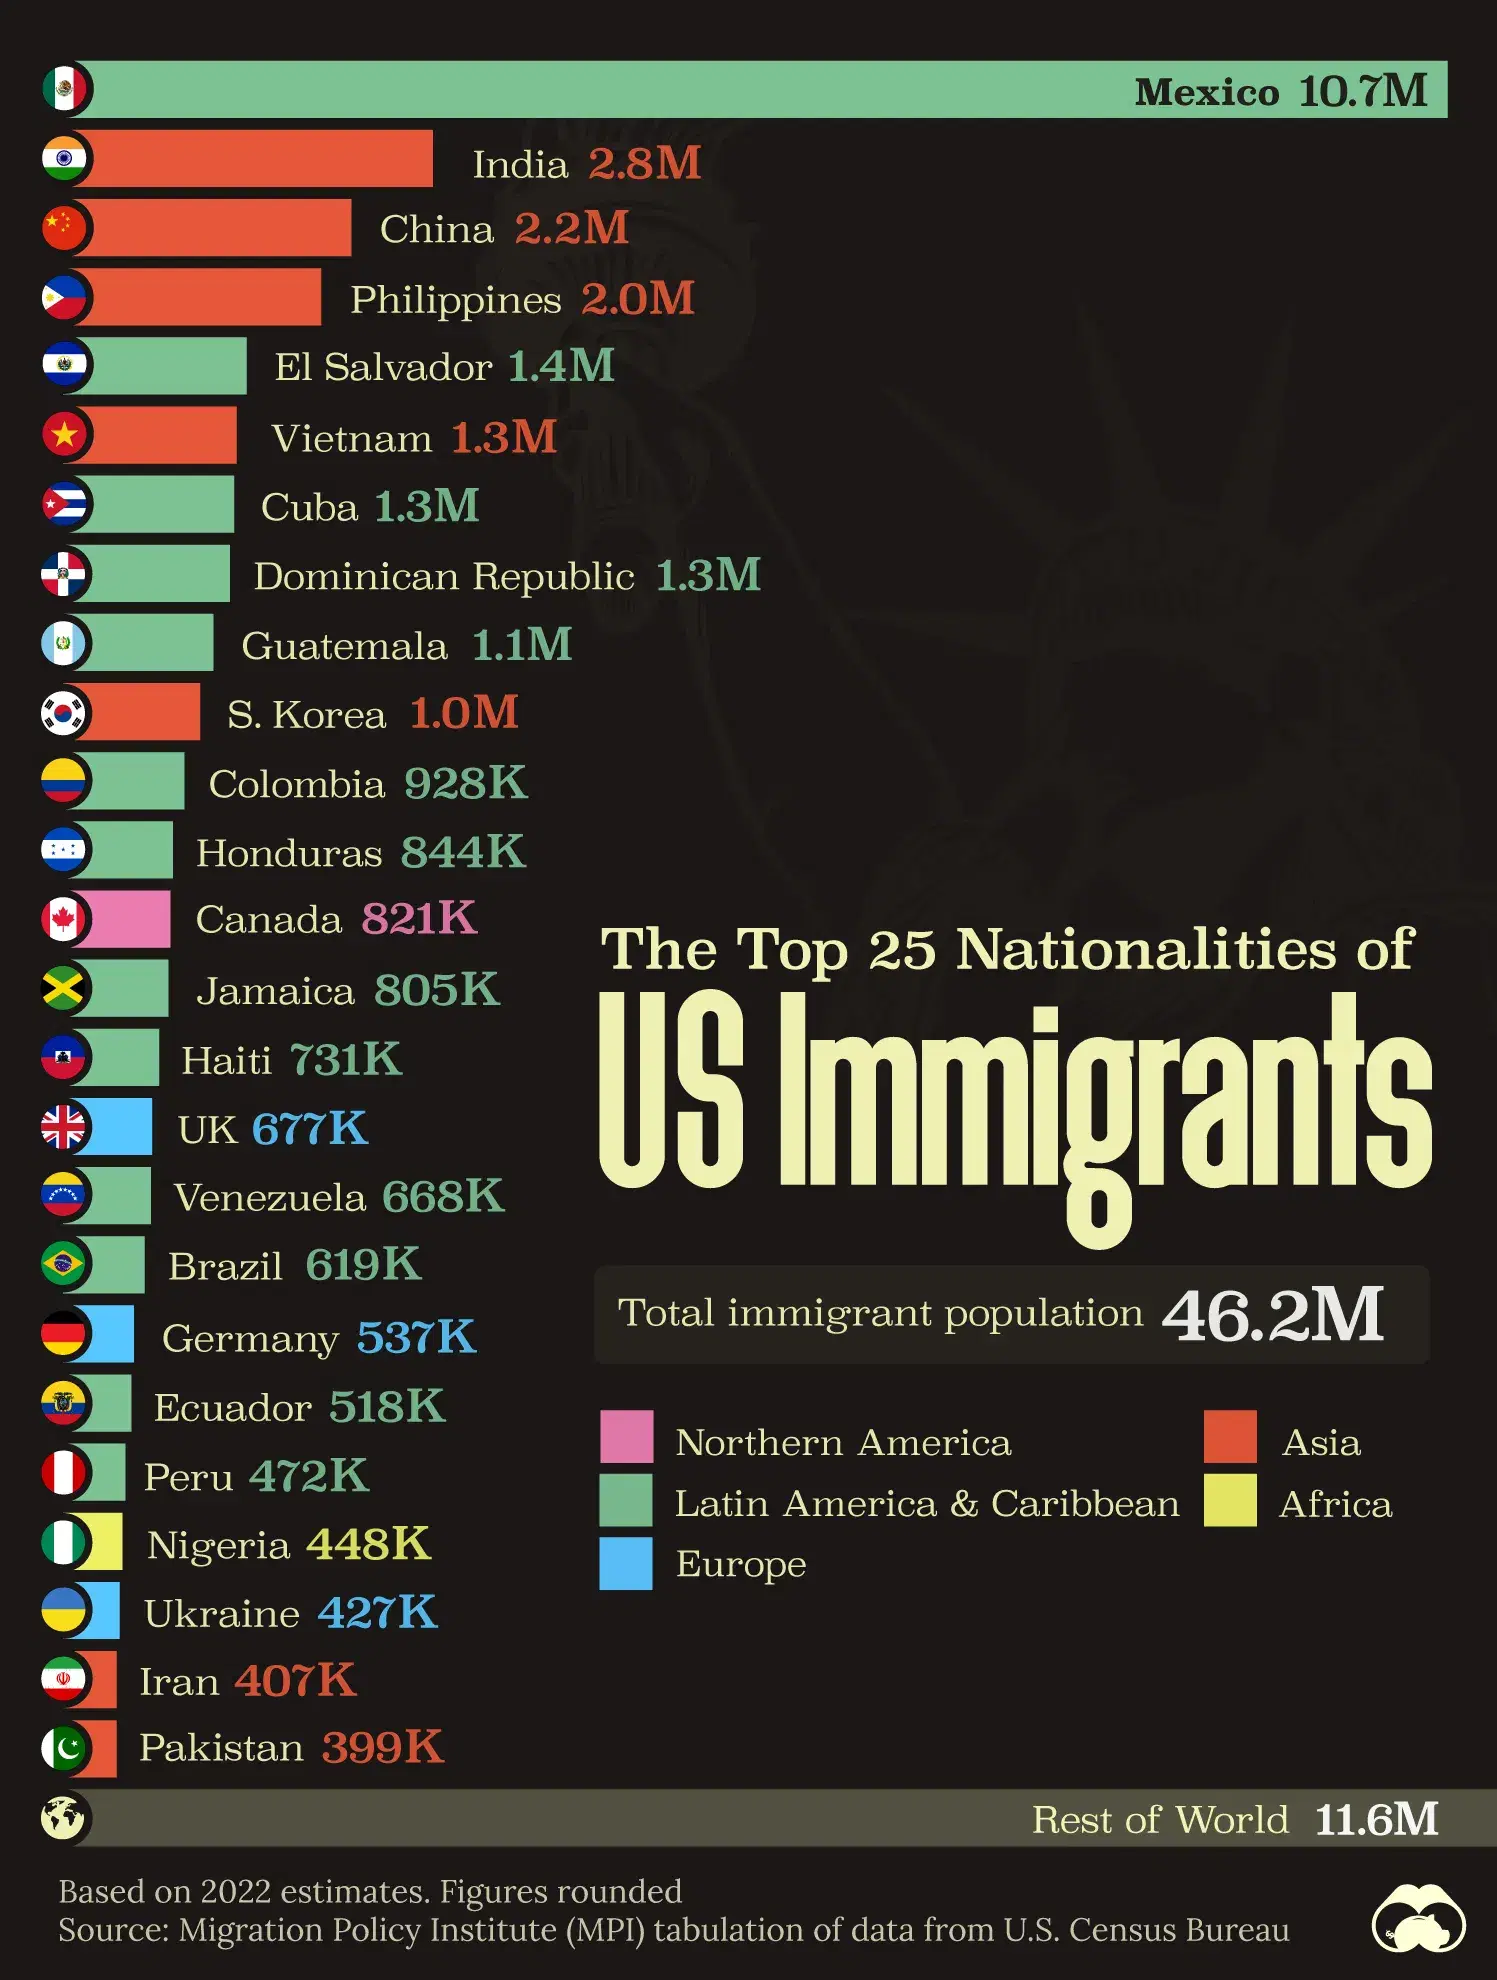 Mexico, India & China Are the Top Sources of U.S. Immigrants 🧳